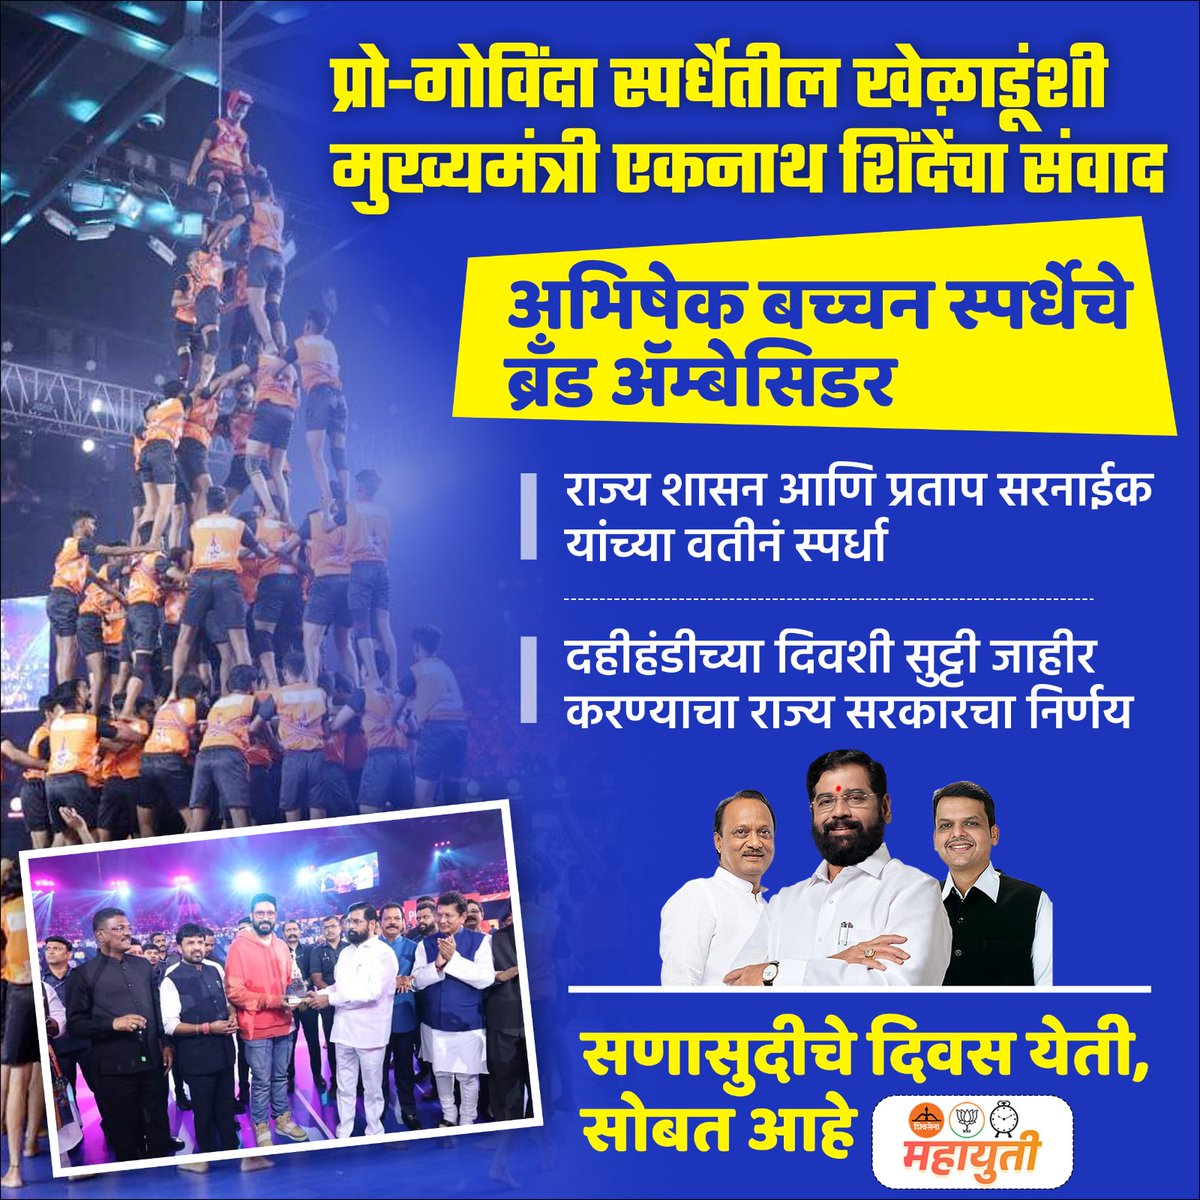 'The decision to host the Pro-Govinda tournament on behalf of the State Government showcases their commitment to nurturing talent and celebrating our cultural heritage. Way to go, Shinde govt! 🌟 #ShindeGovernment